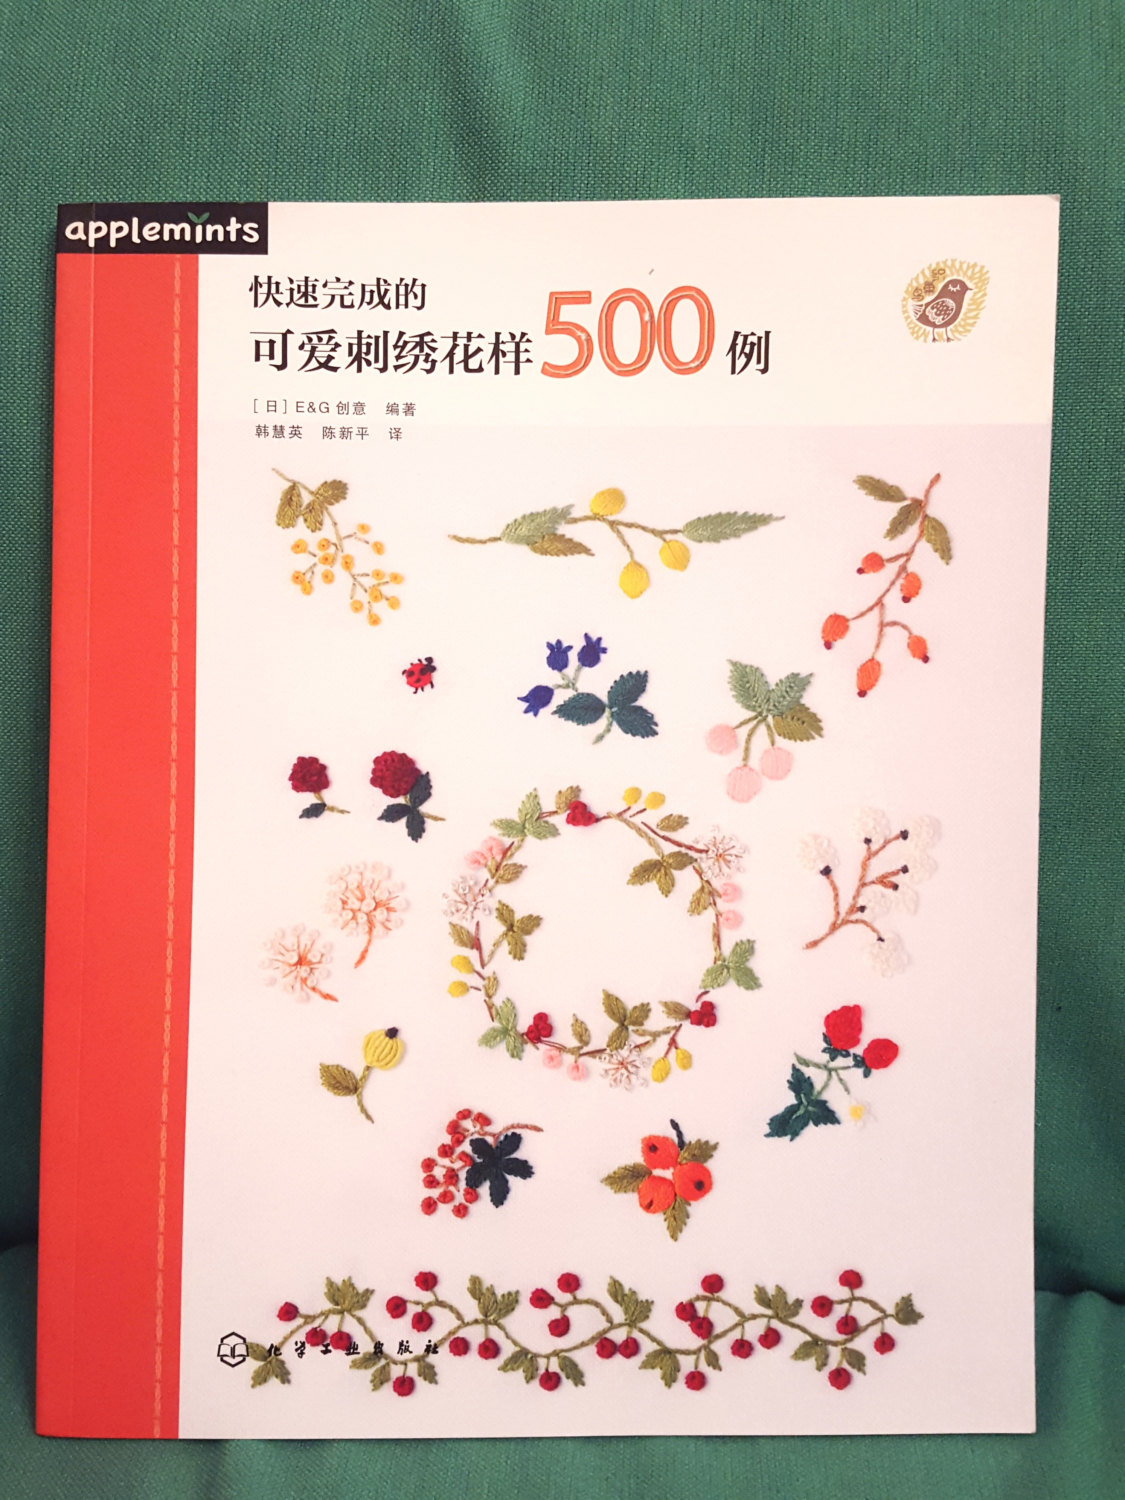 Japanese Embroidery Patterns Embroidery Book 500 Easy And Cute Embroidery Patterns Japanese